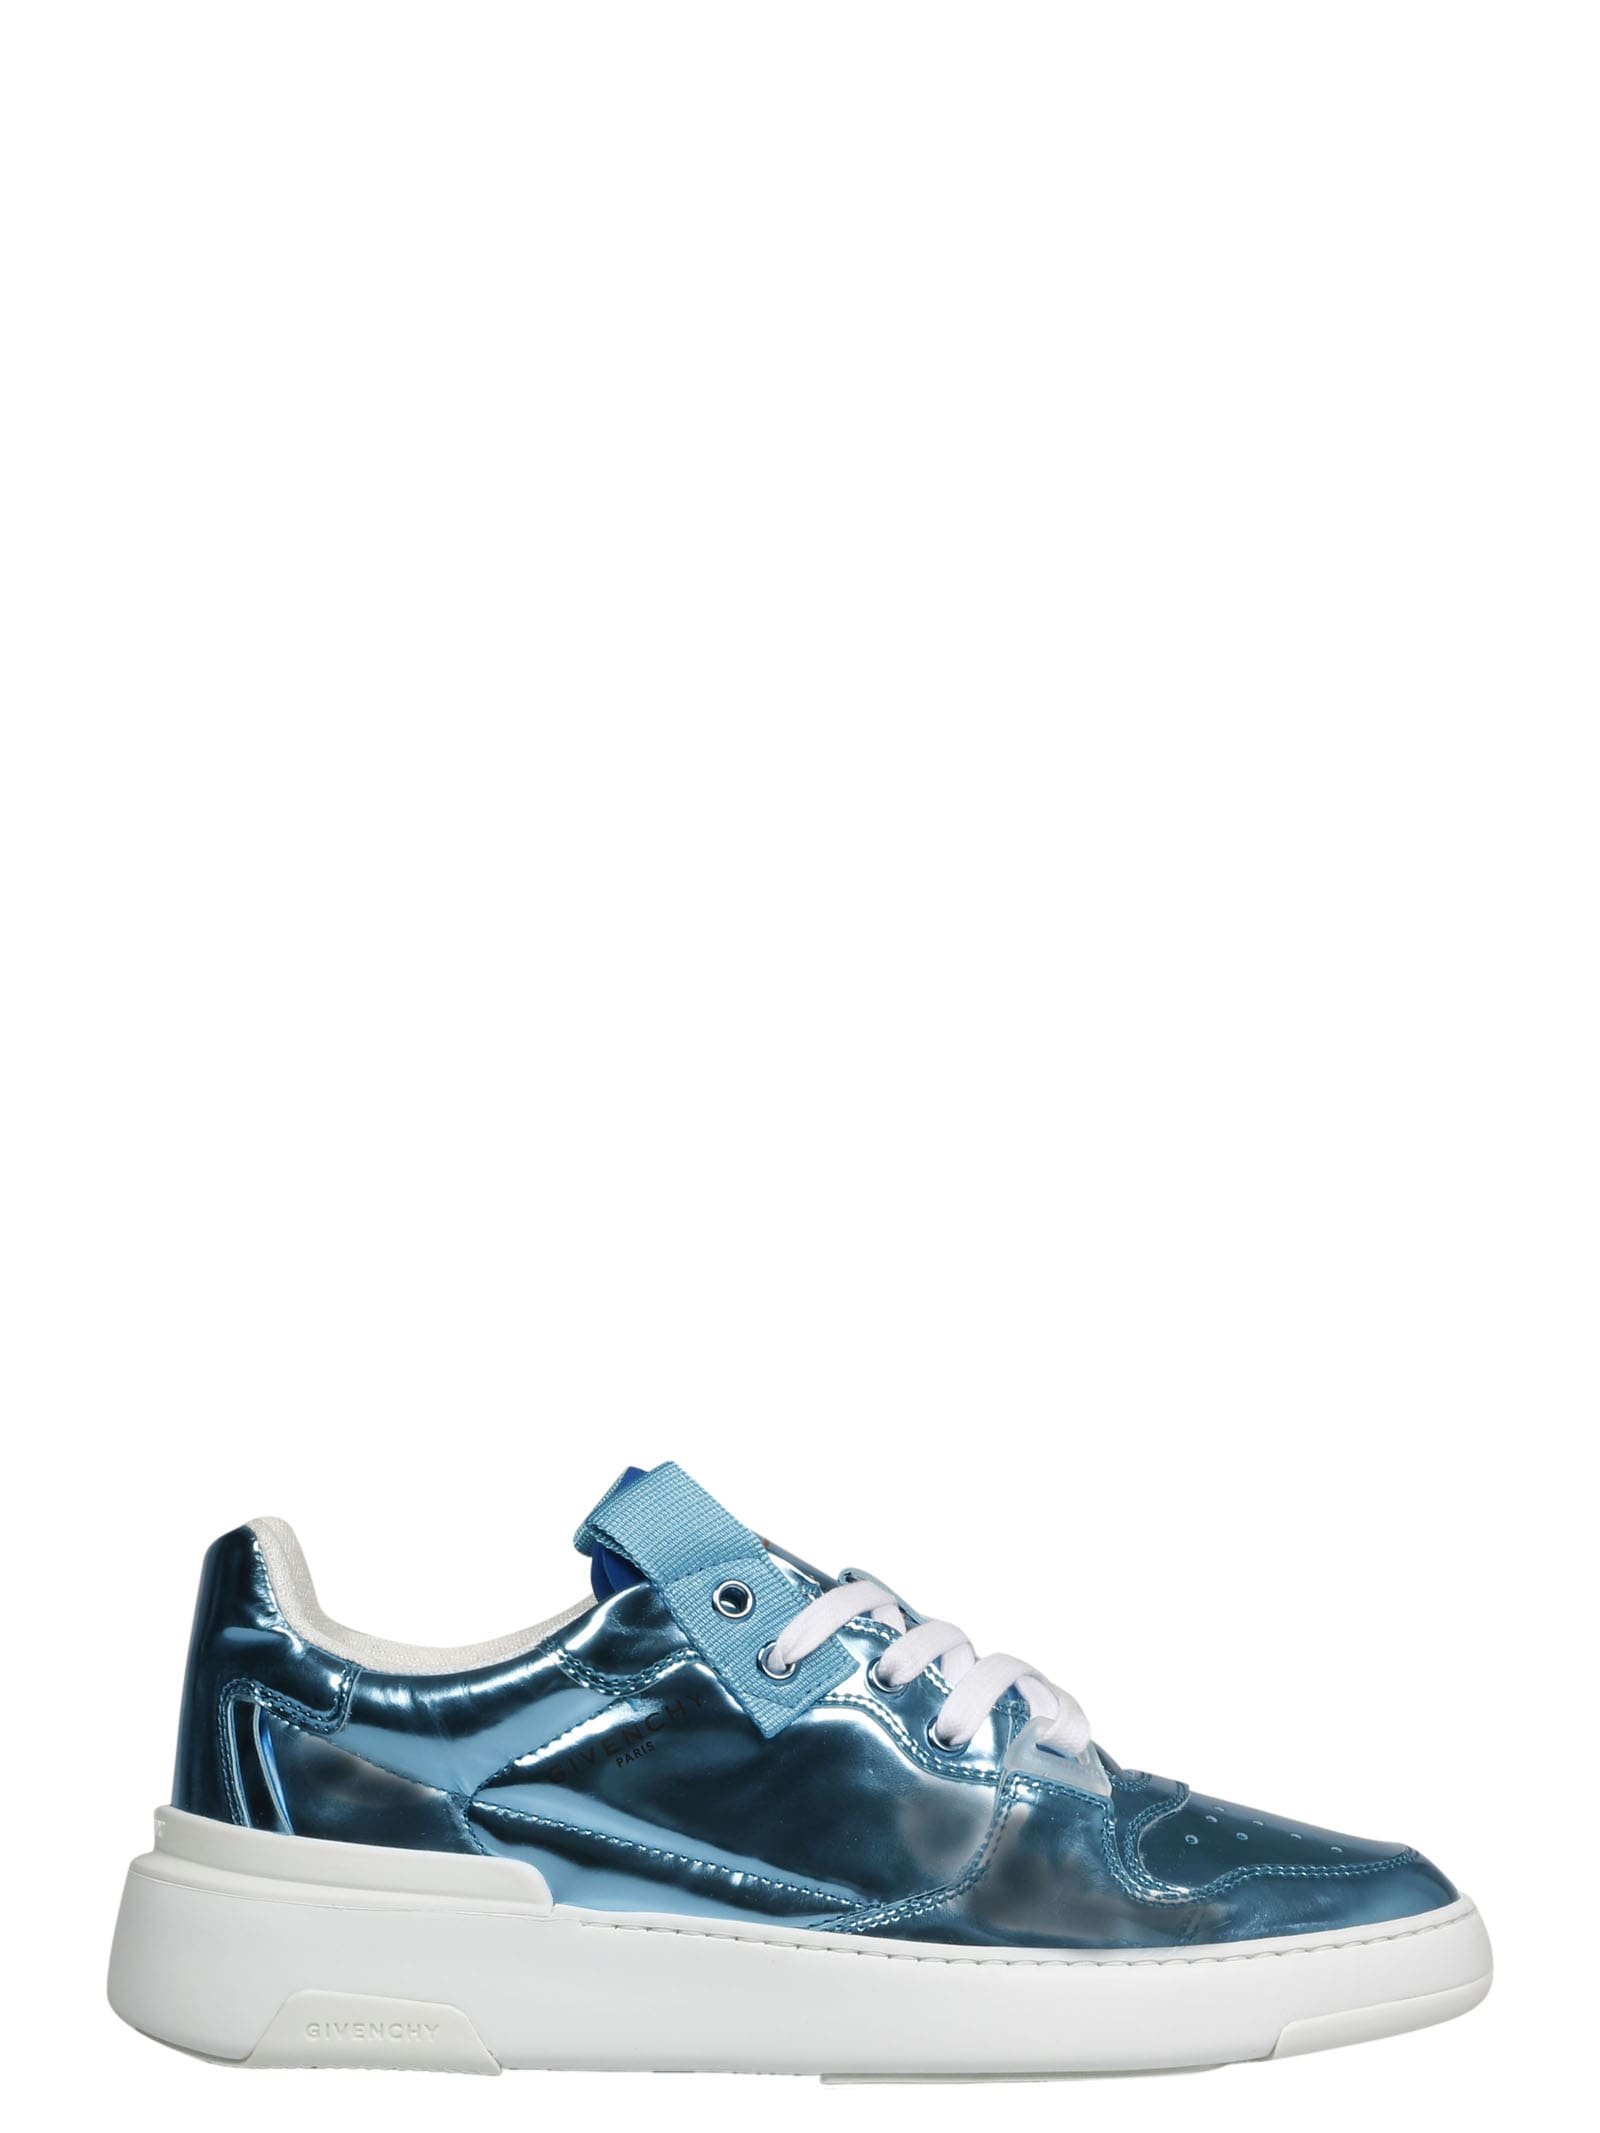 Givenchy Wing Sneaker In Blue